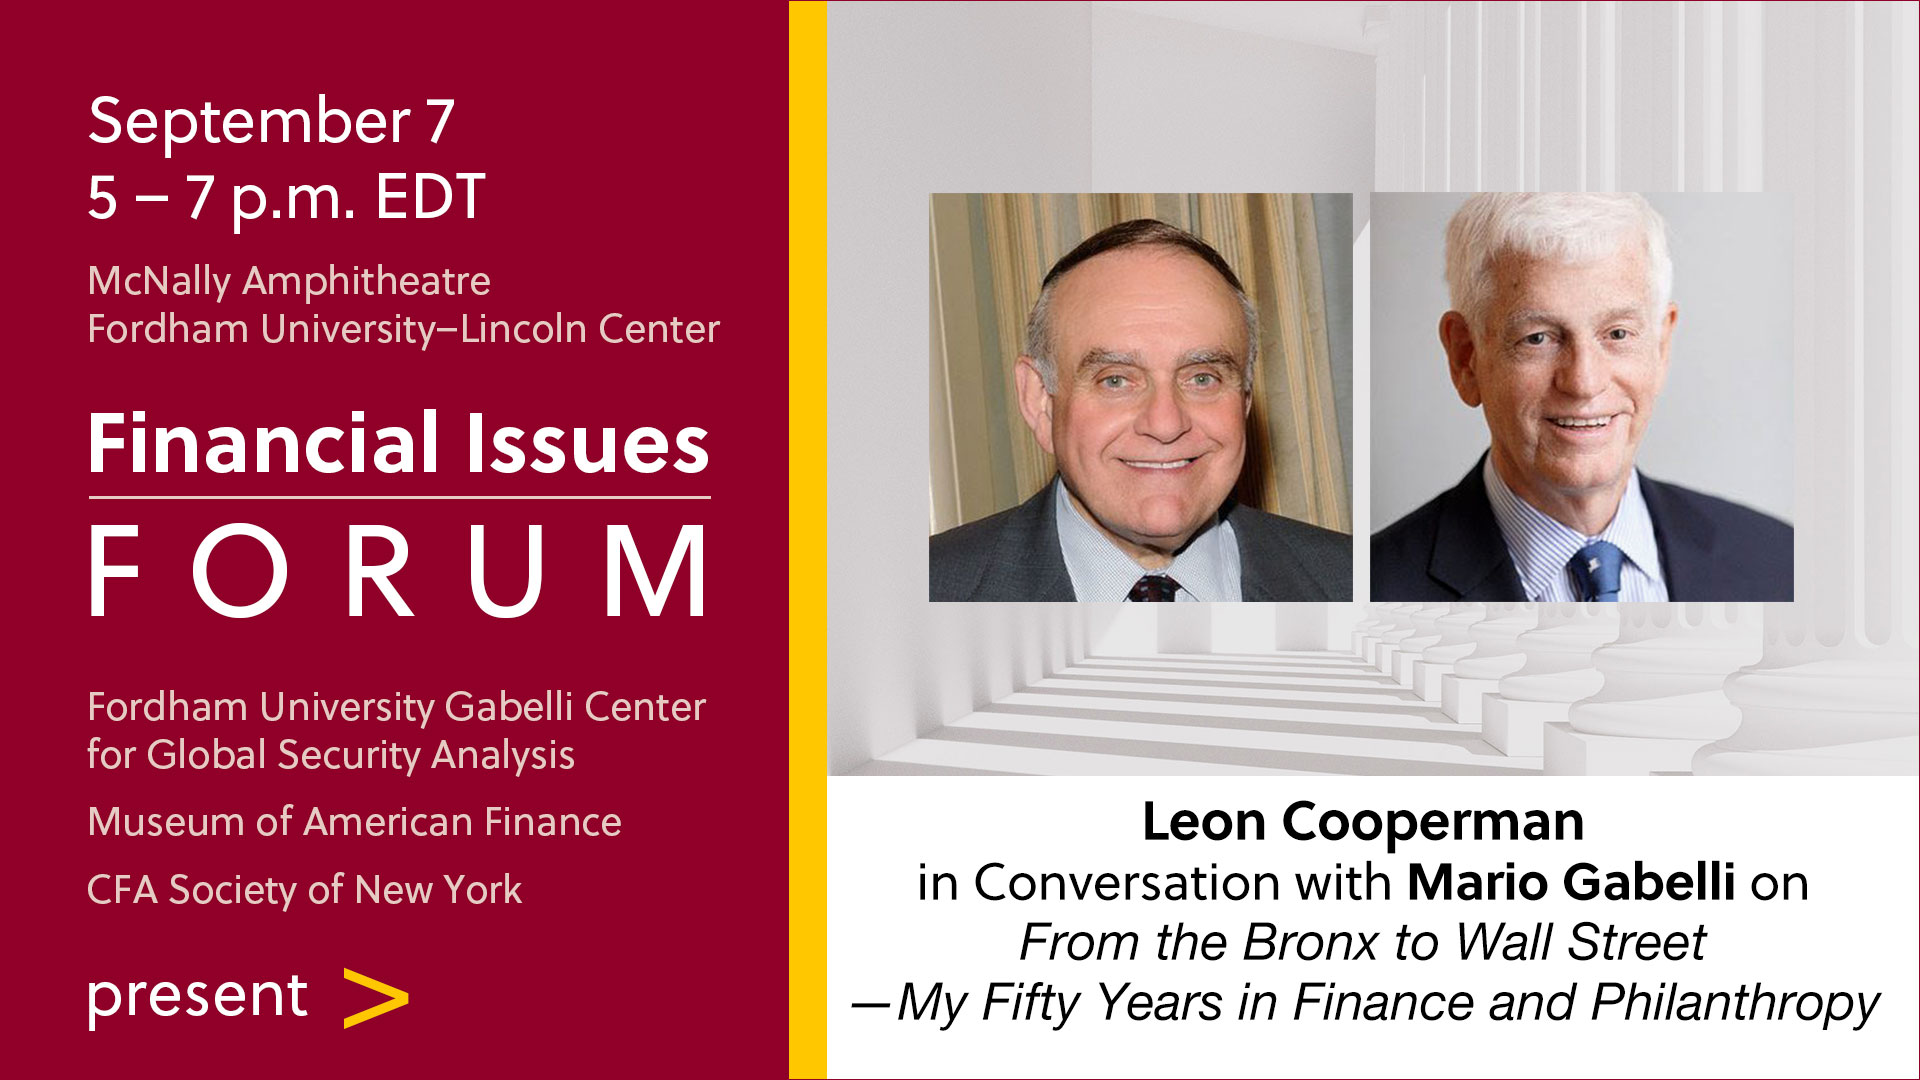 Leon Cooperman and Mario Gabelli smiling along with event information.